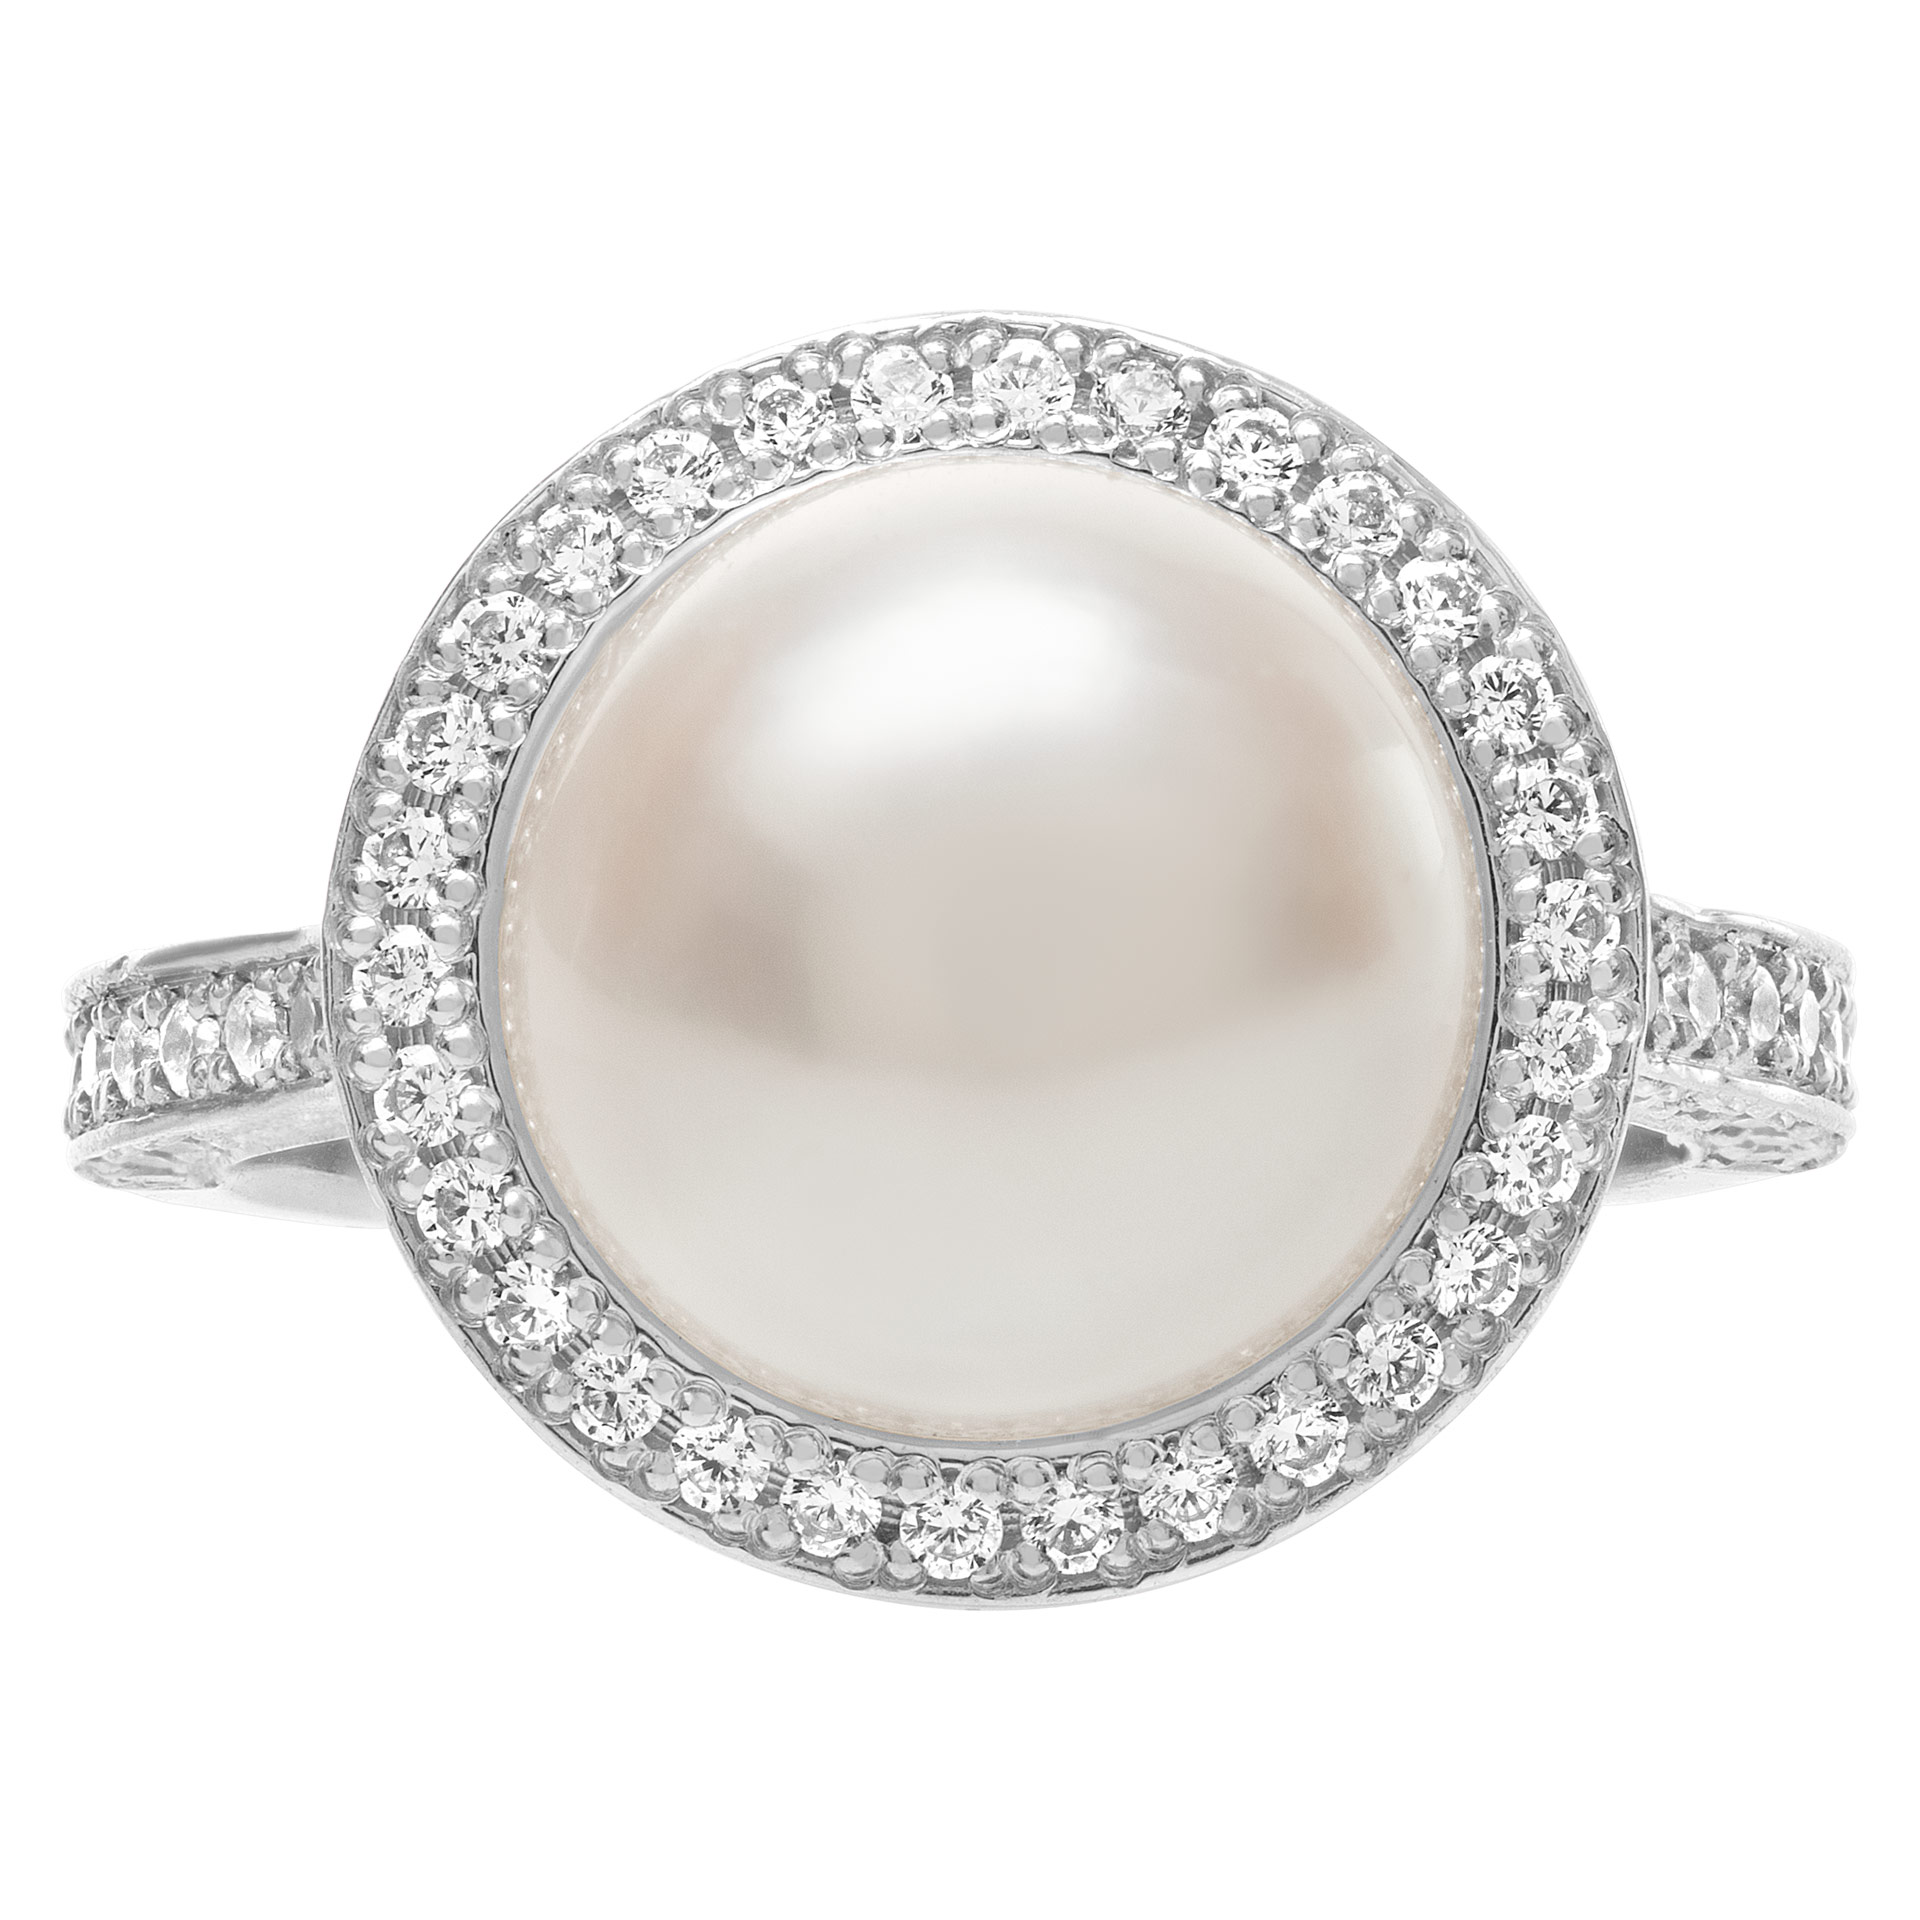 South Sea 11.7mm pearl ring with 0.64 cts in diamonds. Size 7.5 image 1